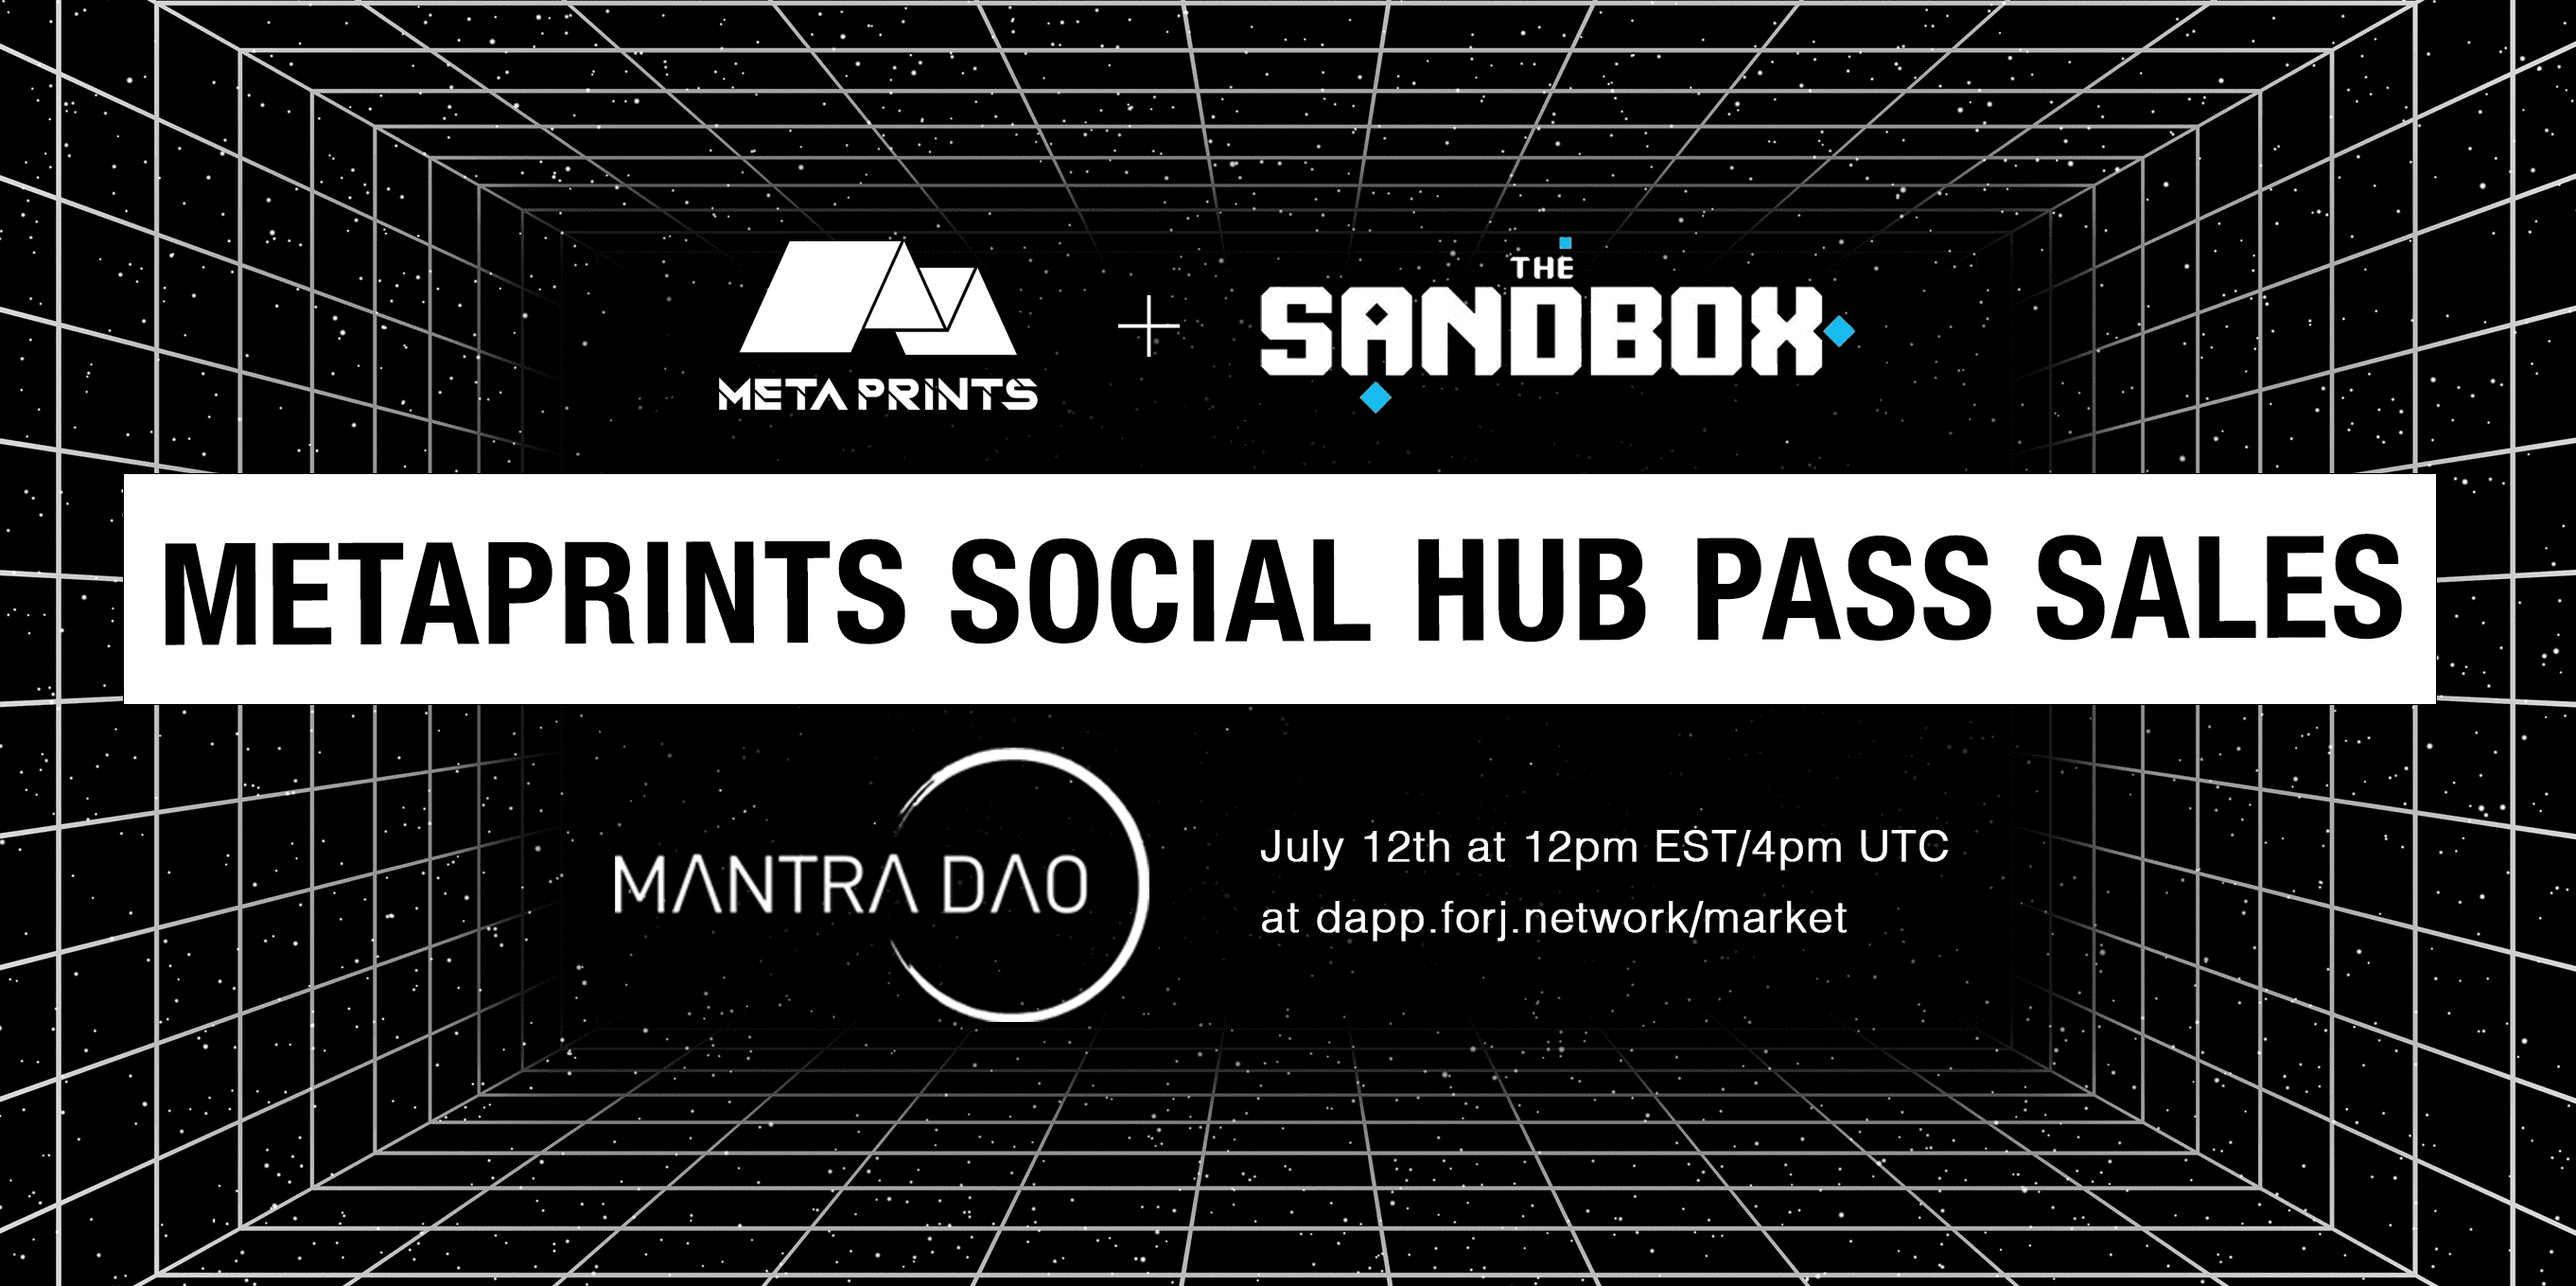 Introducing our Second Social Hub Pass Sale, Starting July 12th with Mantra DAO